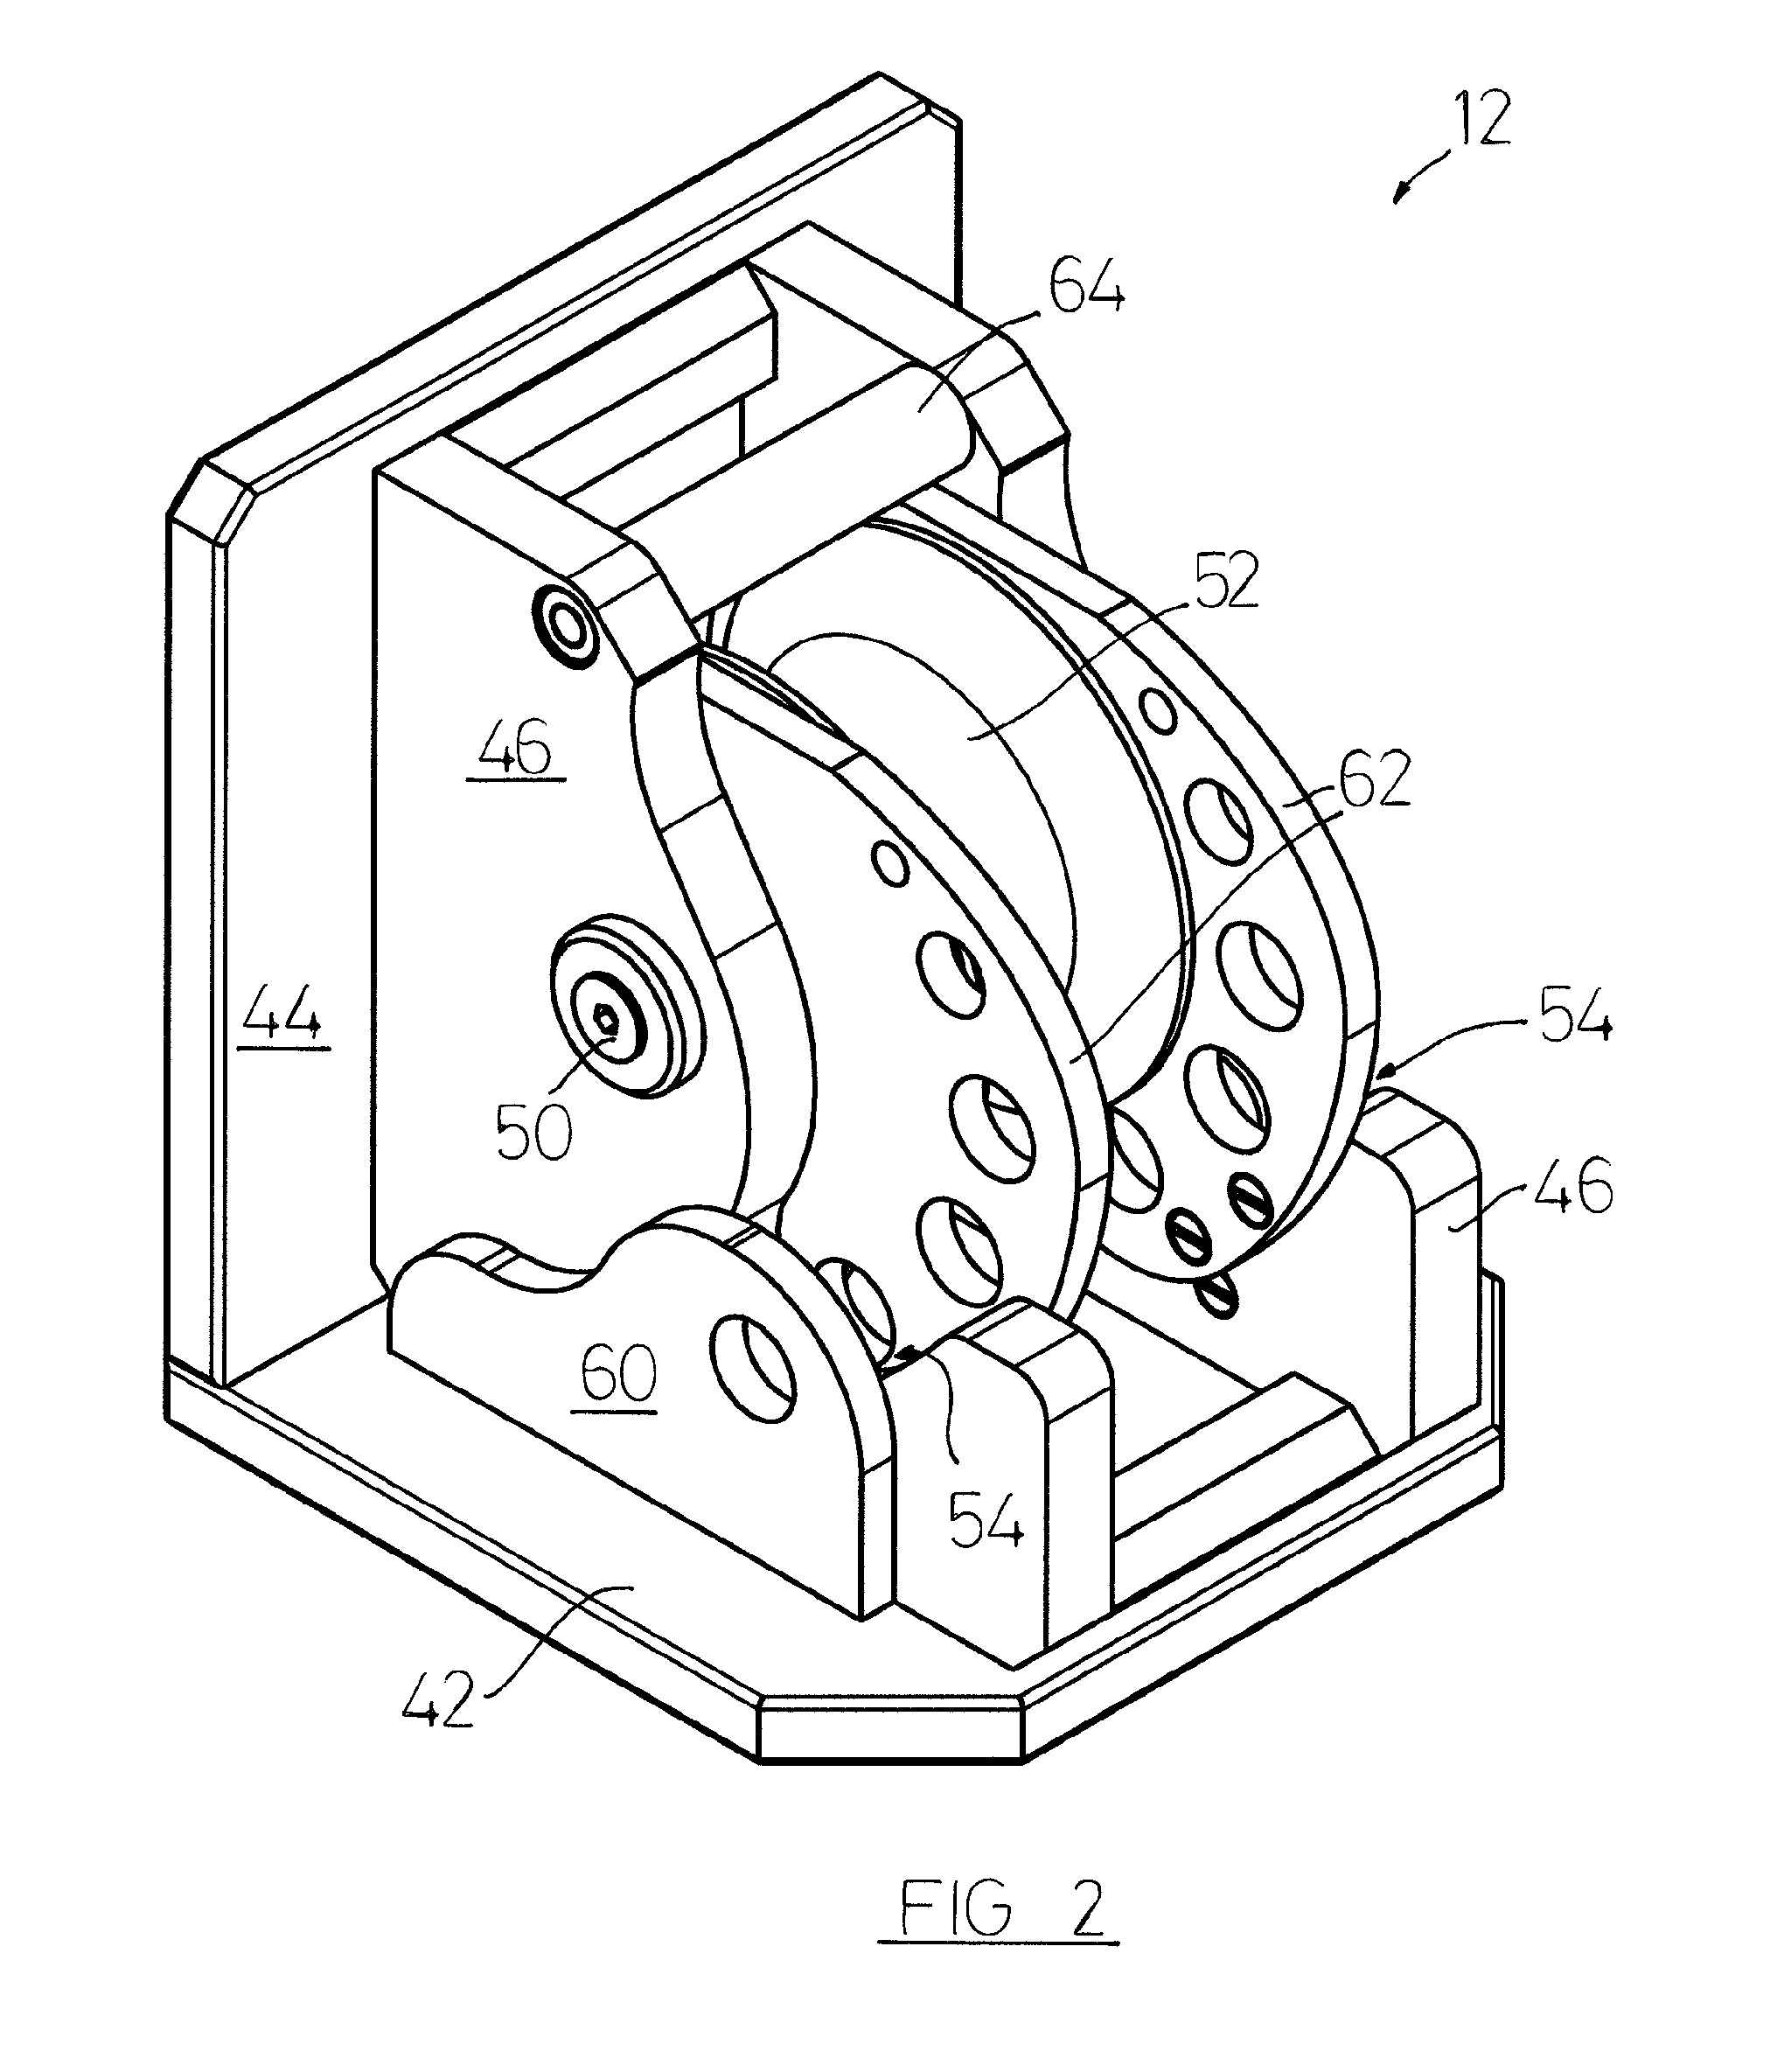 Portable winch assembly